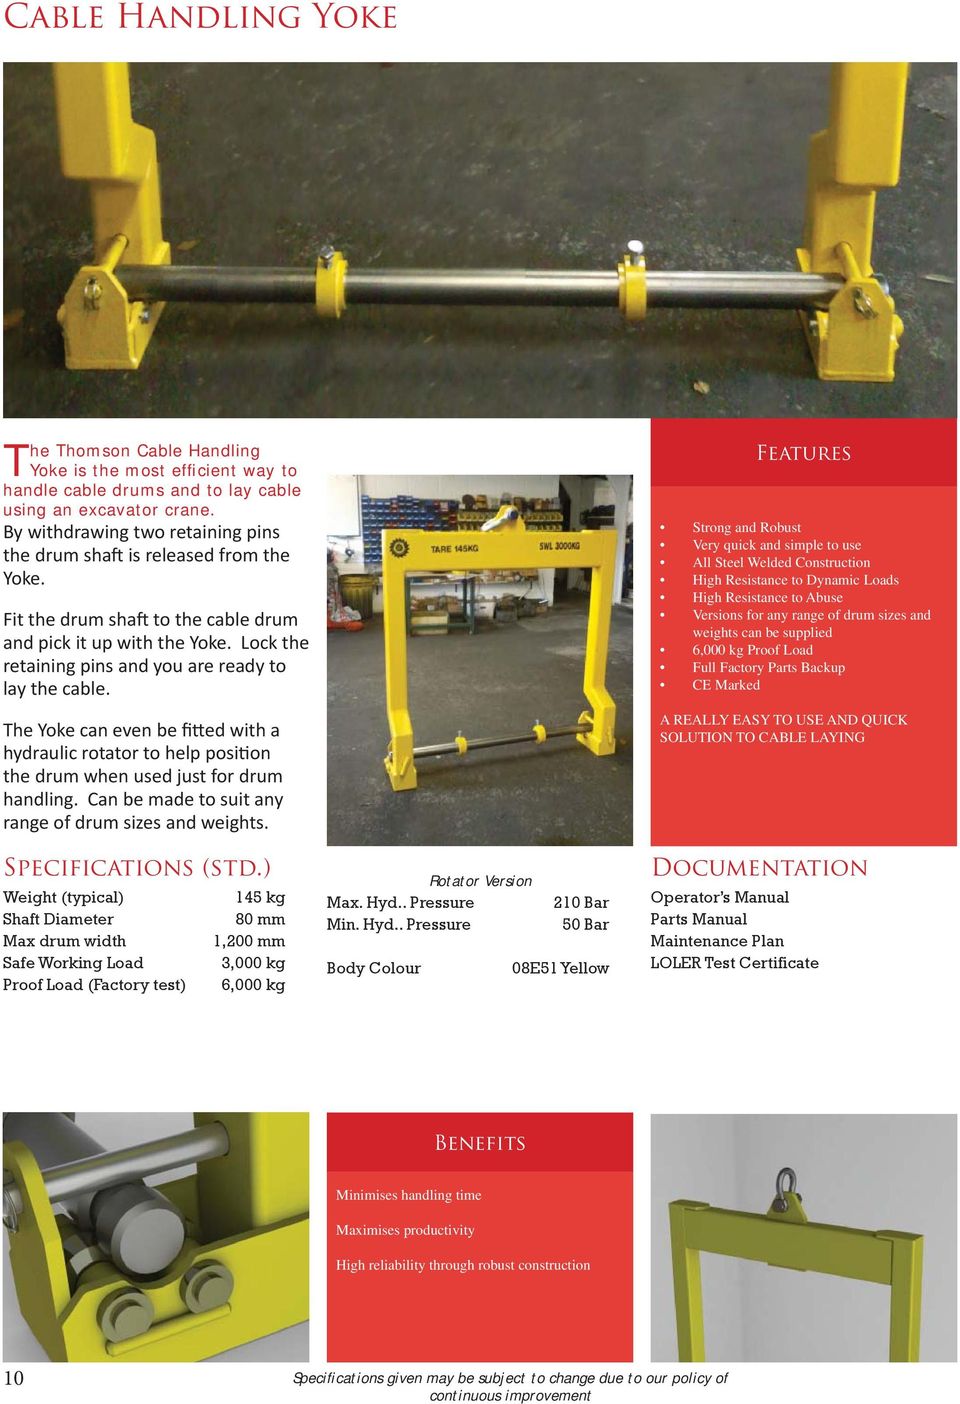 The Yoke can even be fi ed with a hydraulic rotator to help posi on the drum when used just for drum handling. Can be made to suit any range of drum sizes and weights. Specifications (std.